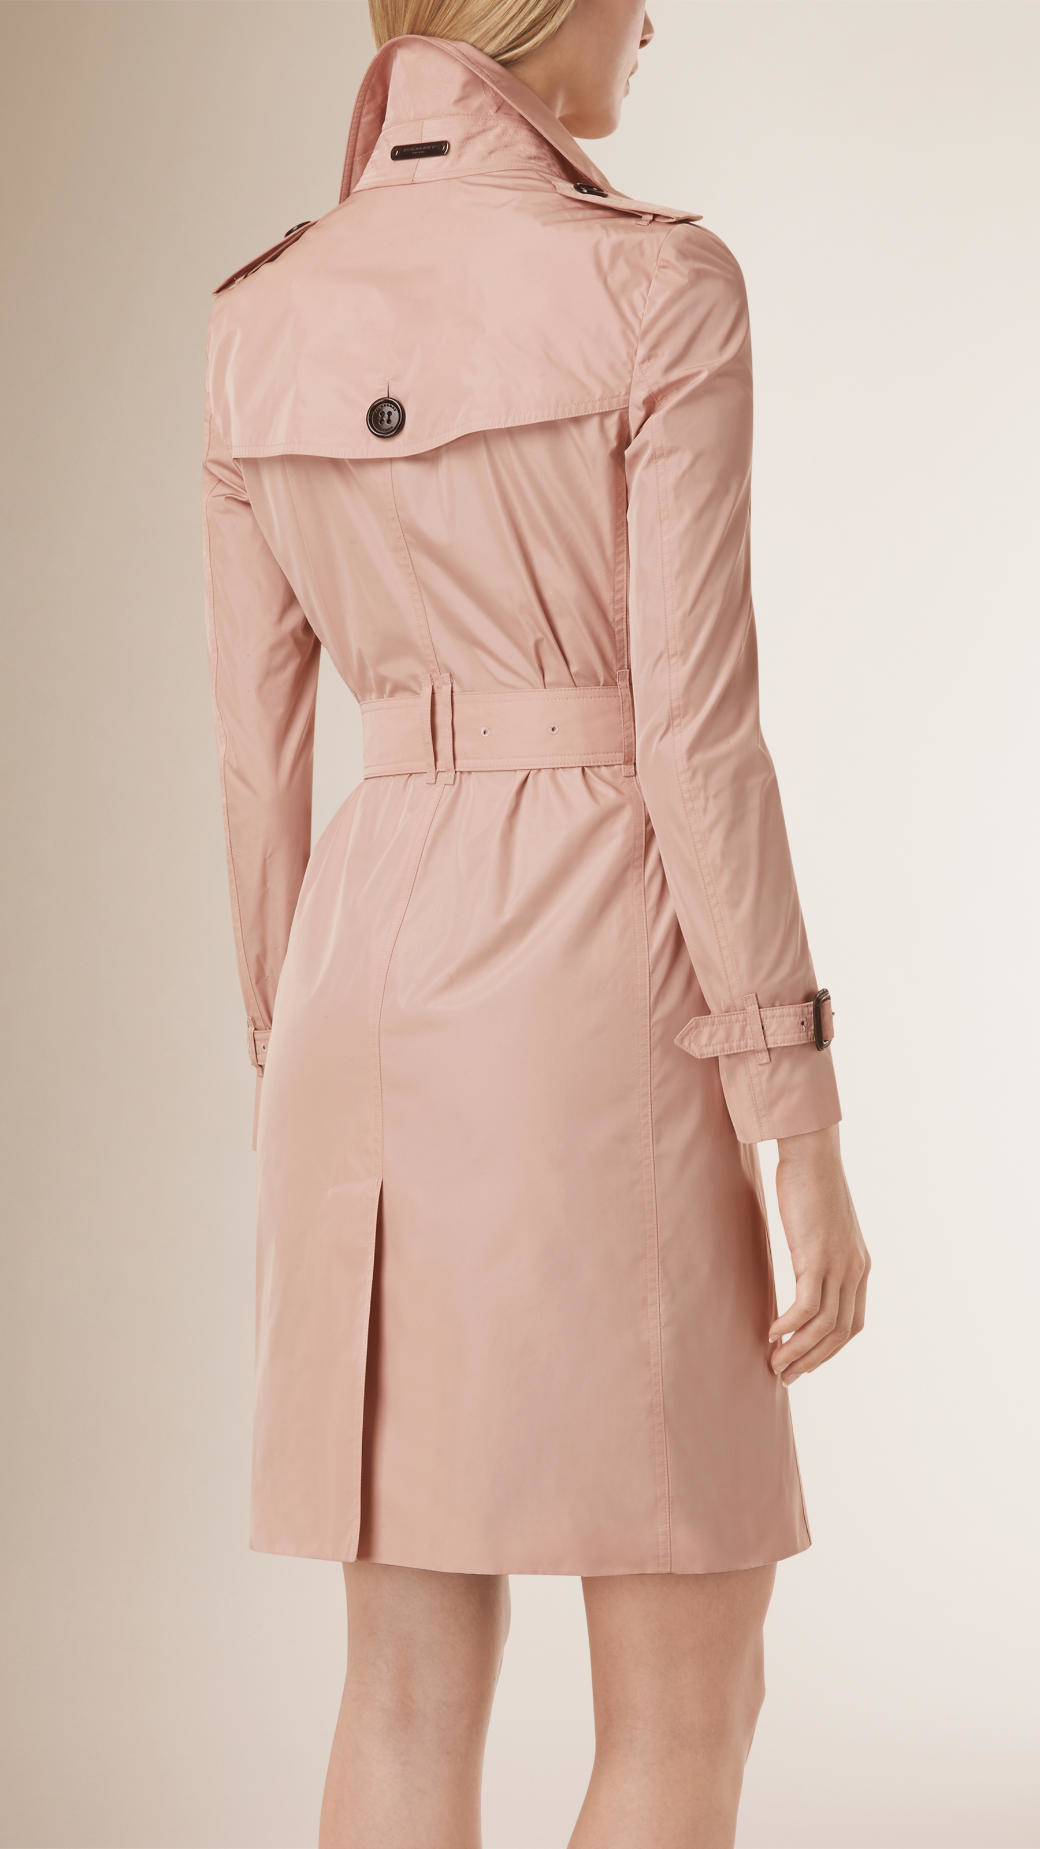 Burberry Technical Trench Coat in Pink - Lyst